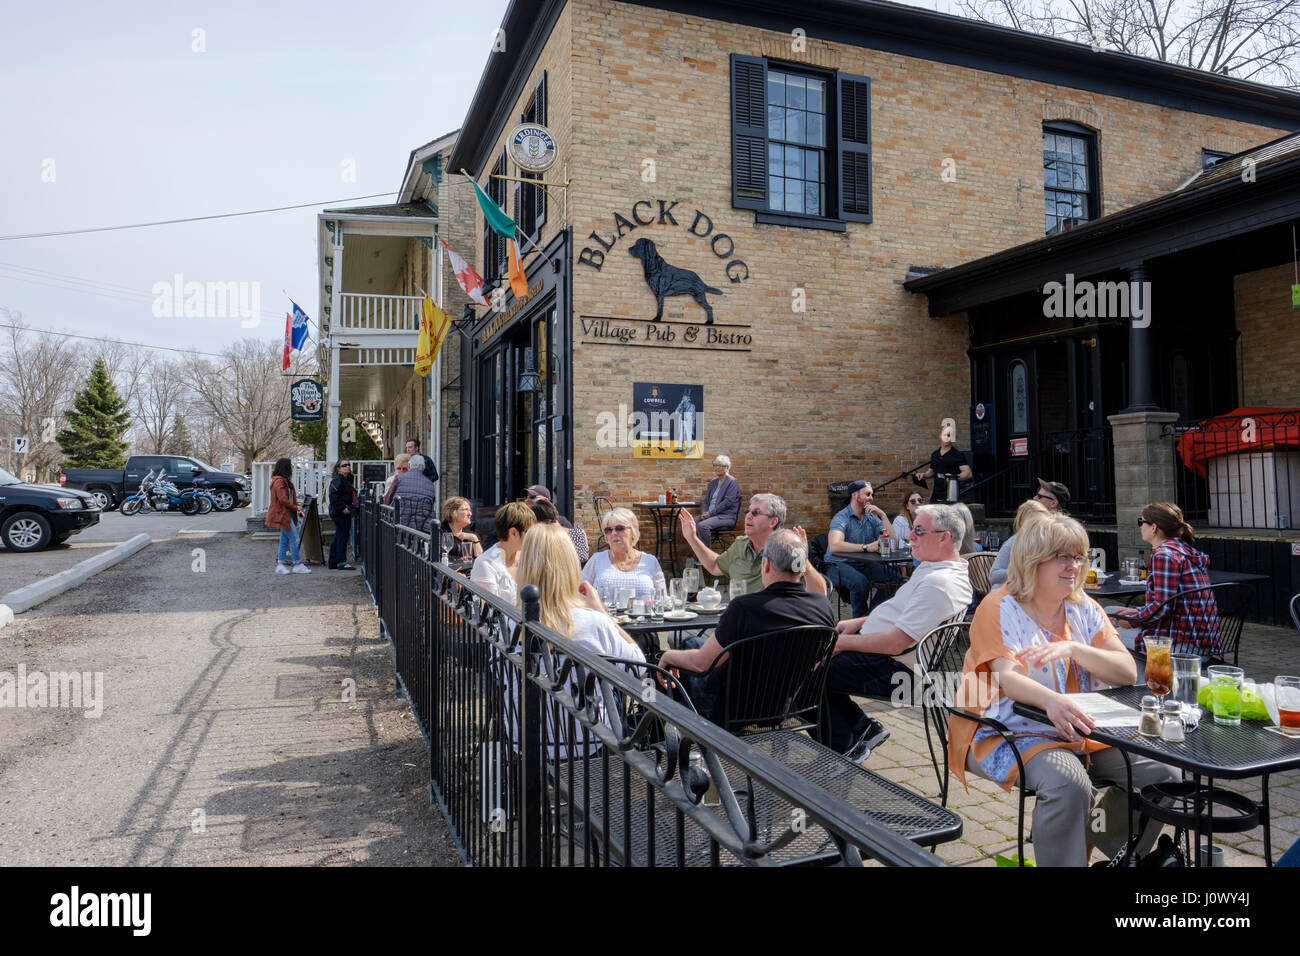 Customers sitting on tables on the outside patio at Black Dog Village Pub & Bistro, a bar, pub, restaurant in the Village of Bayfield, Ontario. Stock Photo